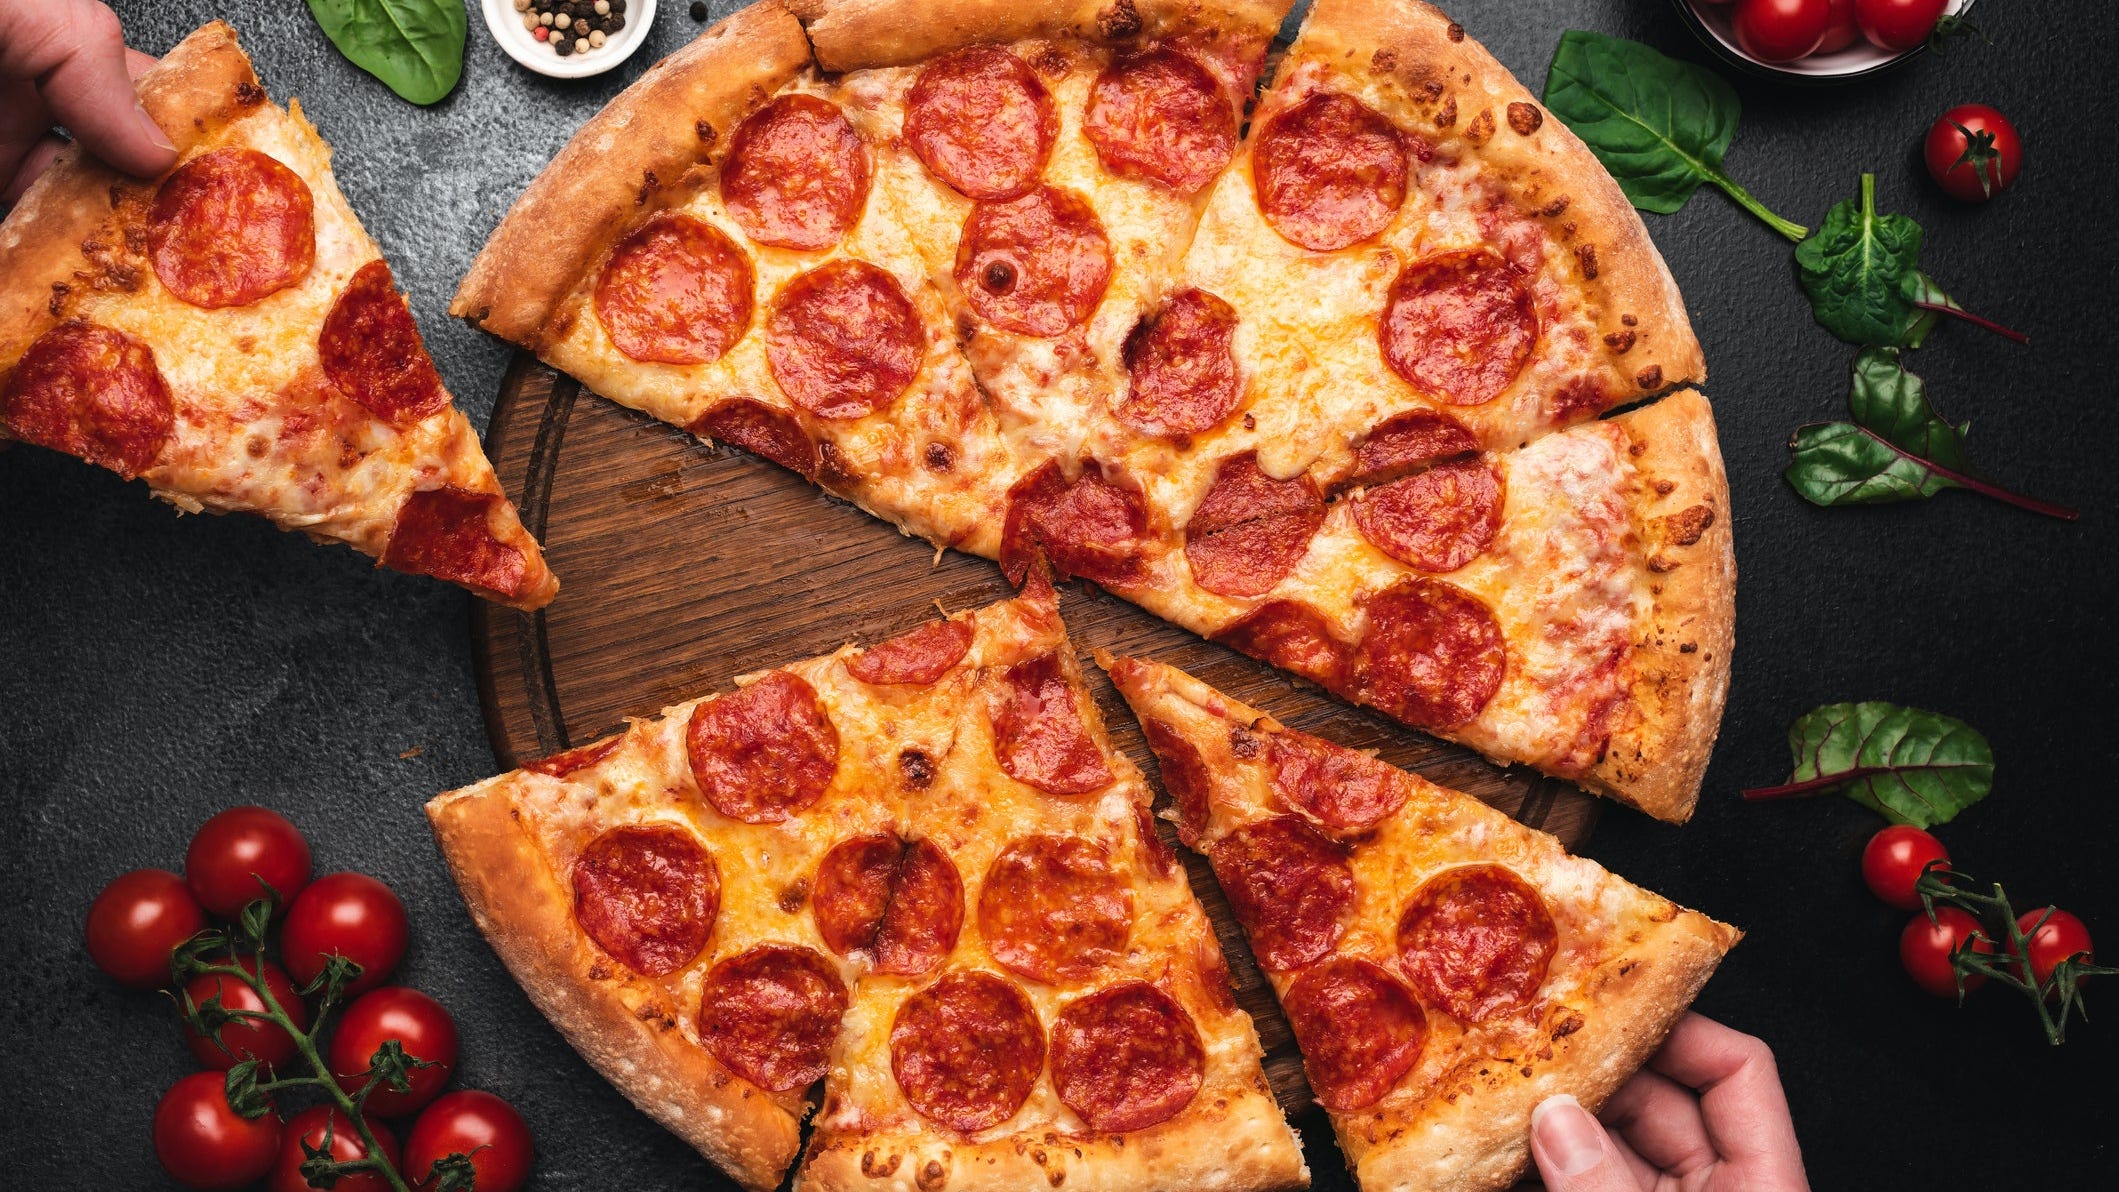 Pi Day 2023 deals Phoenix restaurants offer free, discounted pizza